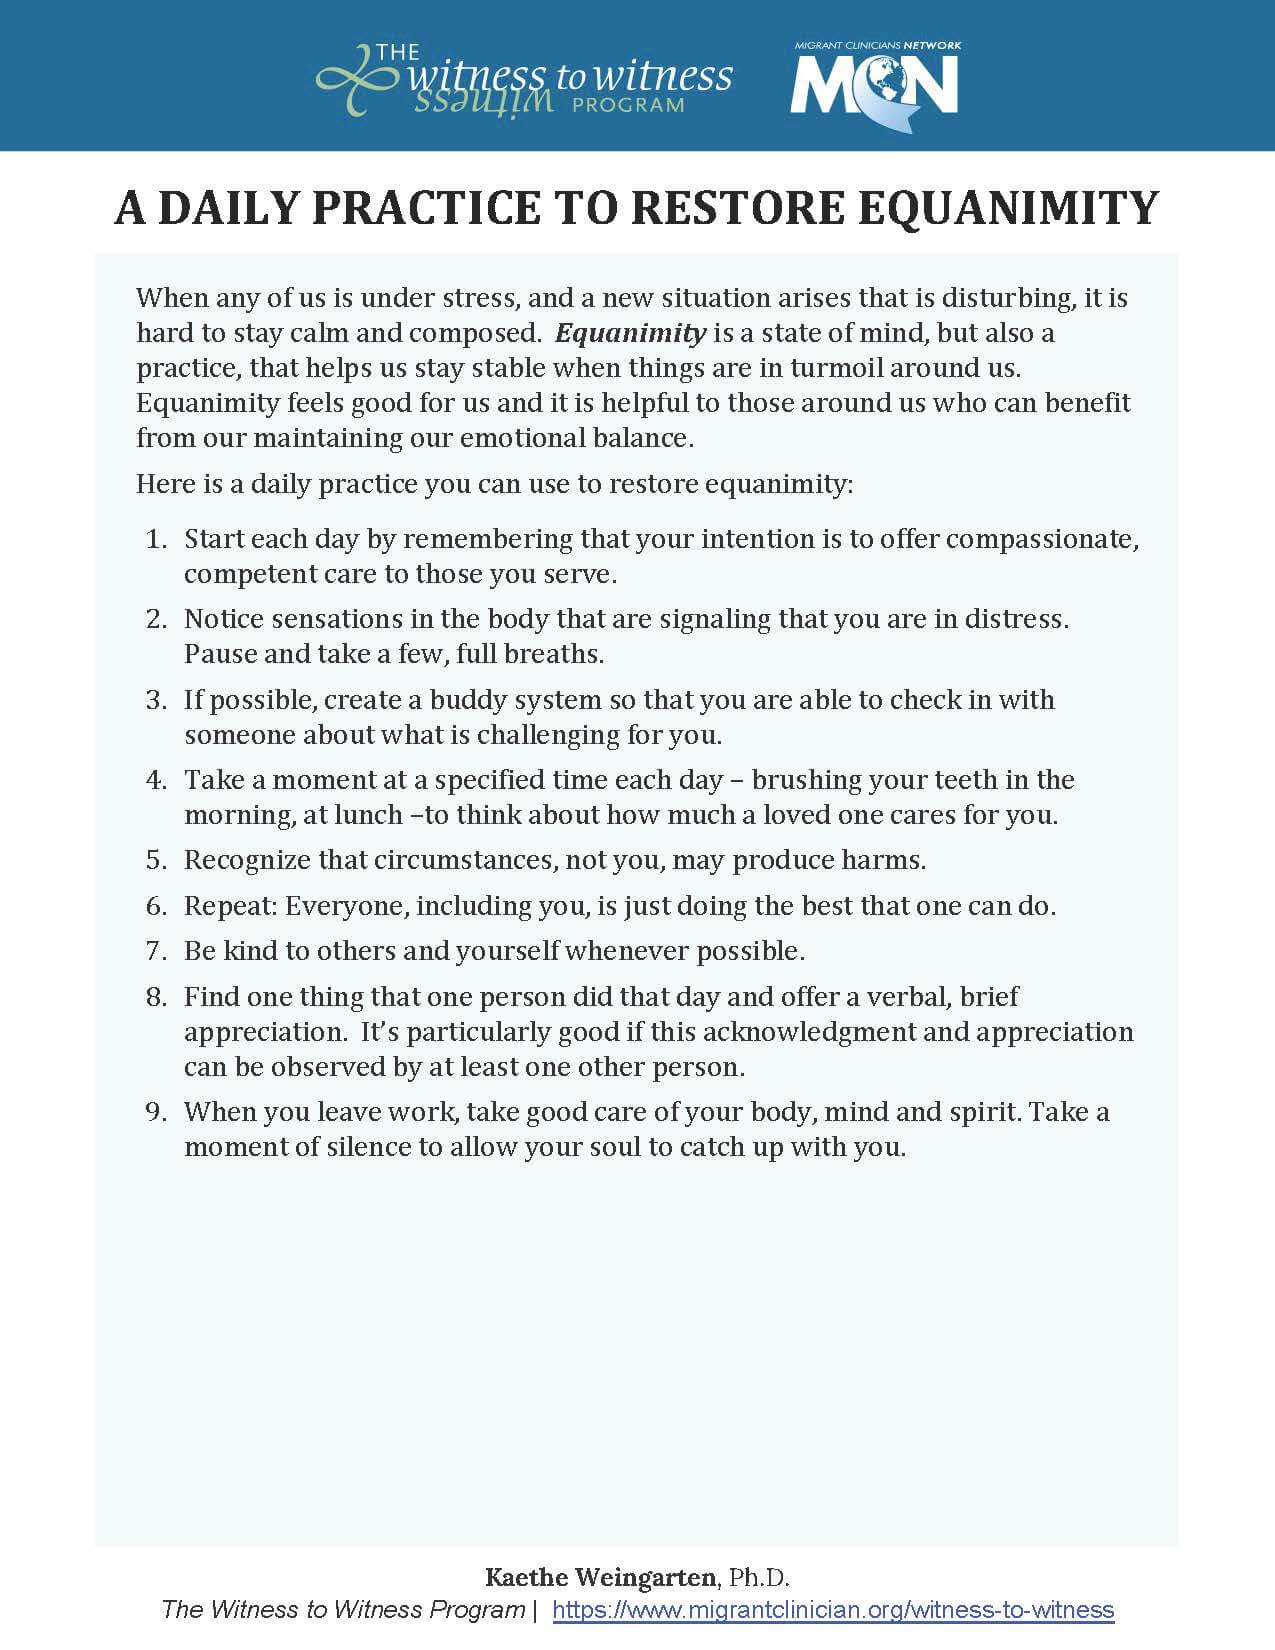 A Daily Practice to Restore Equanimity Handout